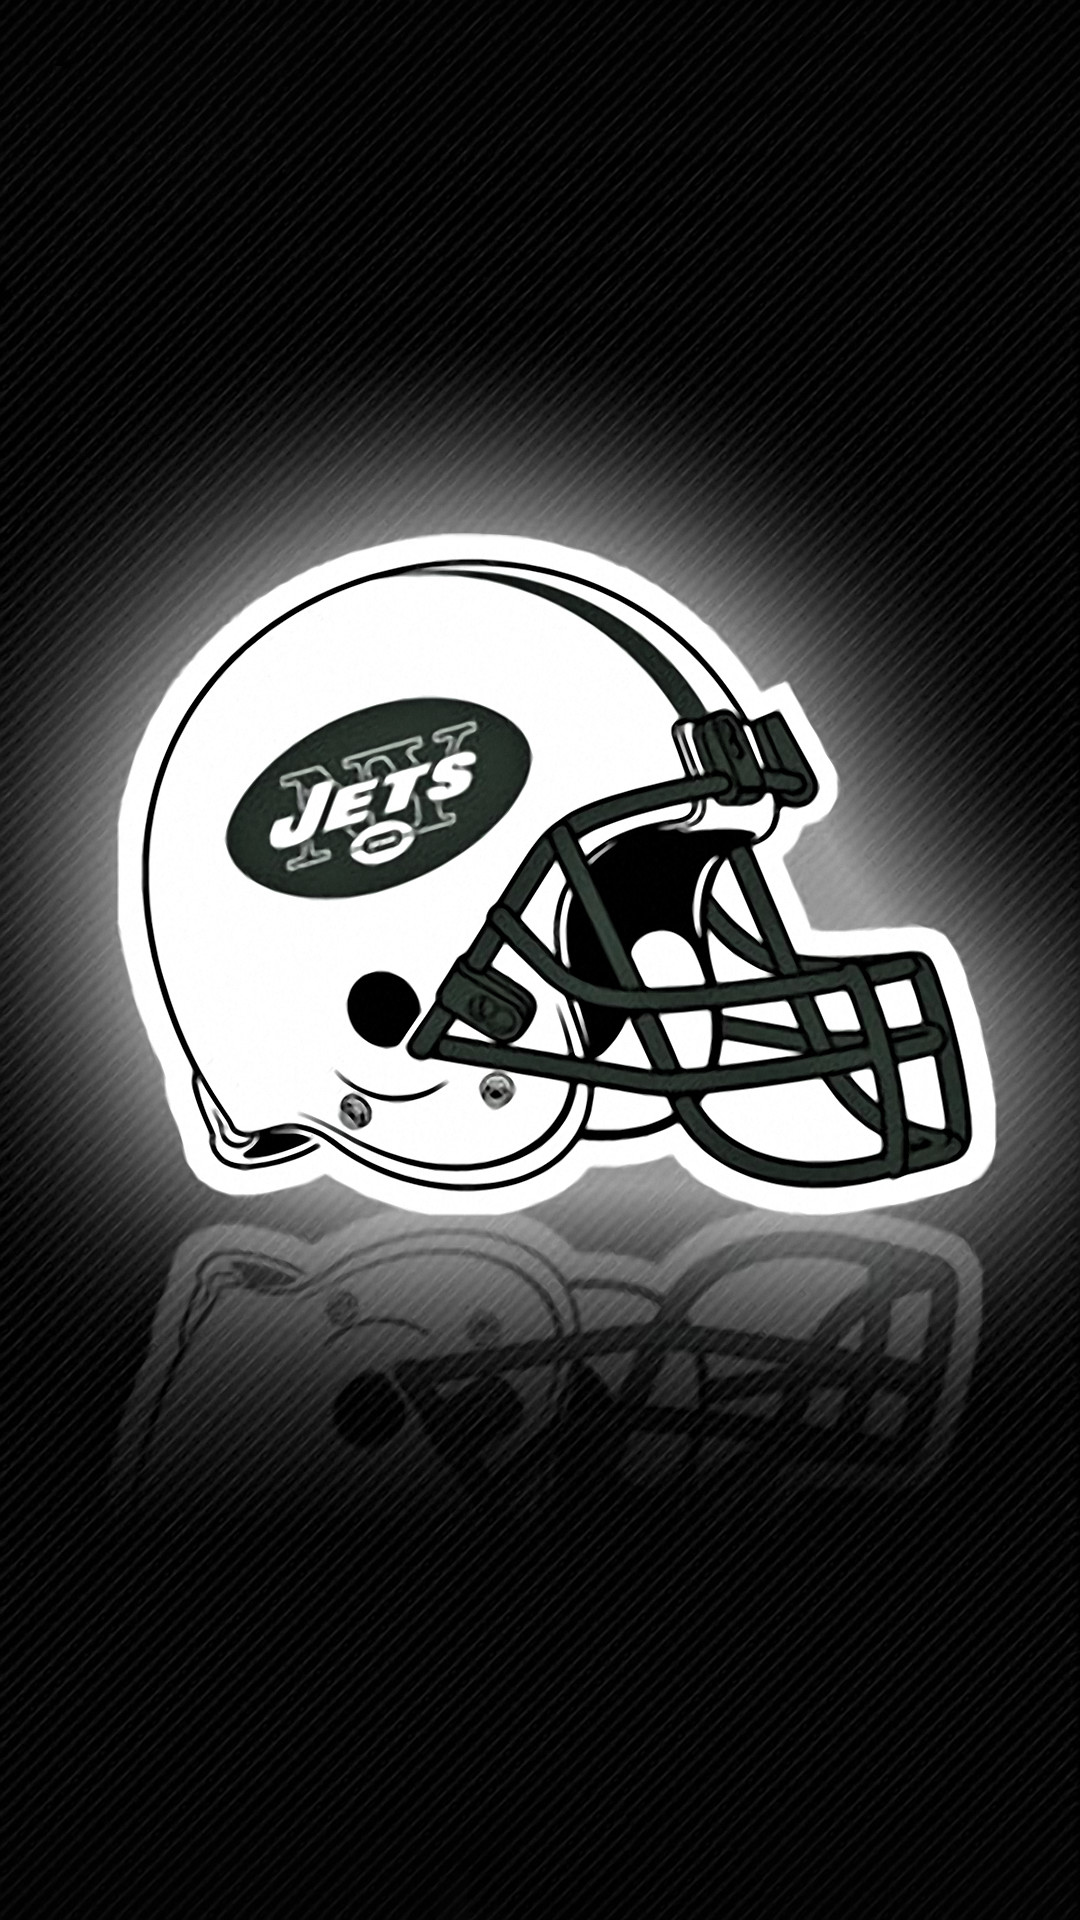 1080x1920 Search Results for “ny jets iphone wallpaper” – Adorable Wallpapers